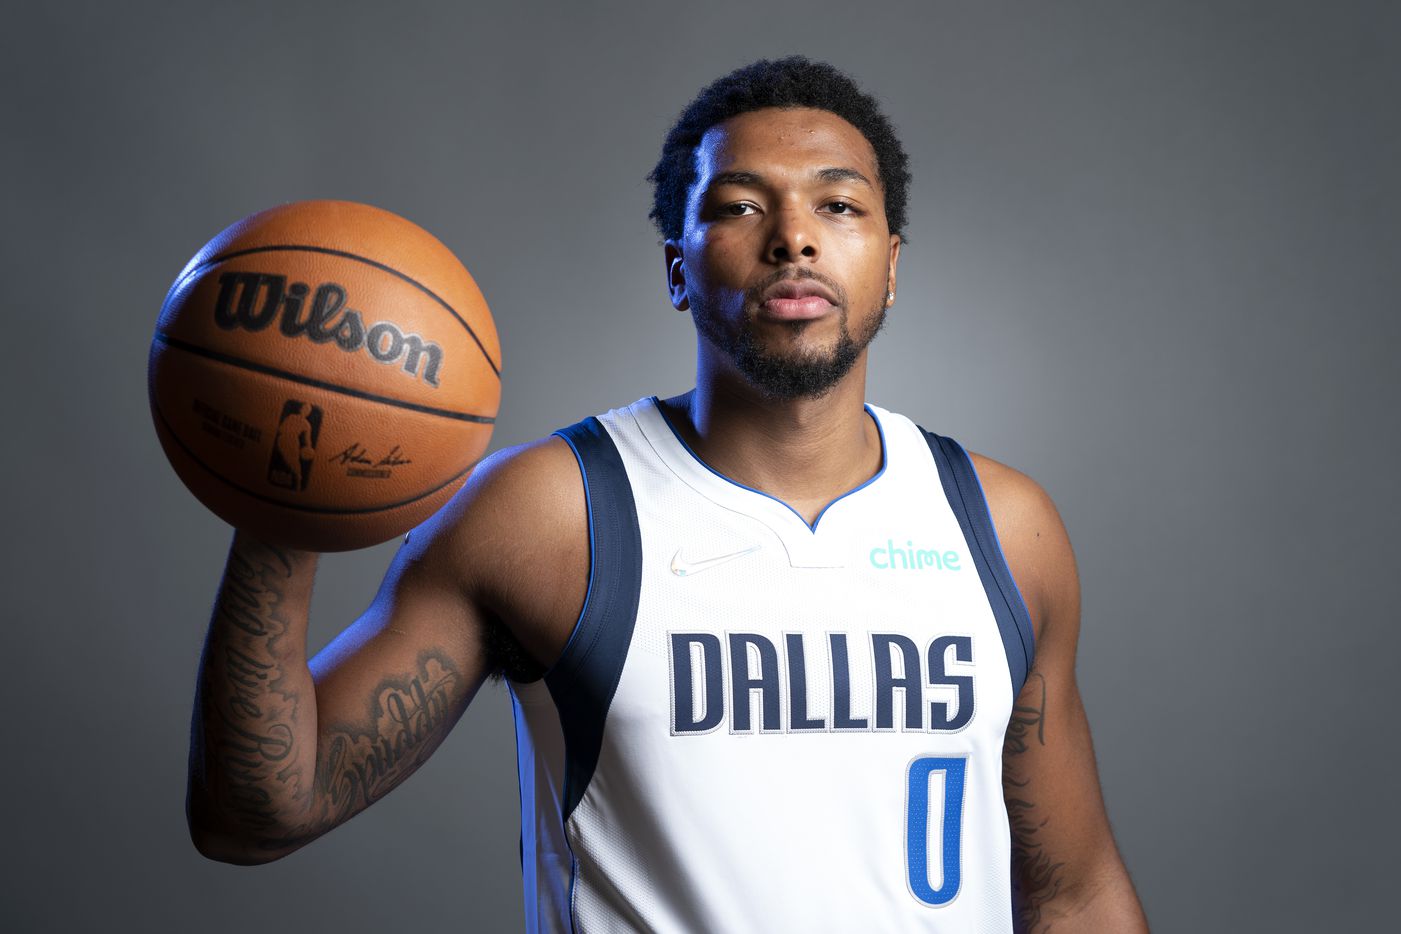 Dallas Mavericks guard Sterling Brown (0) poses for a portrait during the Dallas Mavericks media day, Monday, September 27, 2021 at American Airlines Center in Dallas. (Jeffrey McWhorter/Special Contributor)